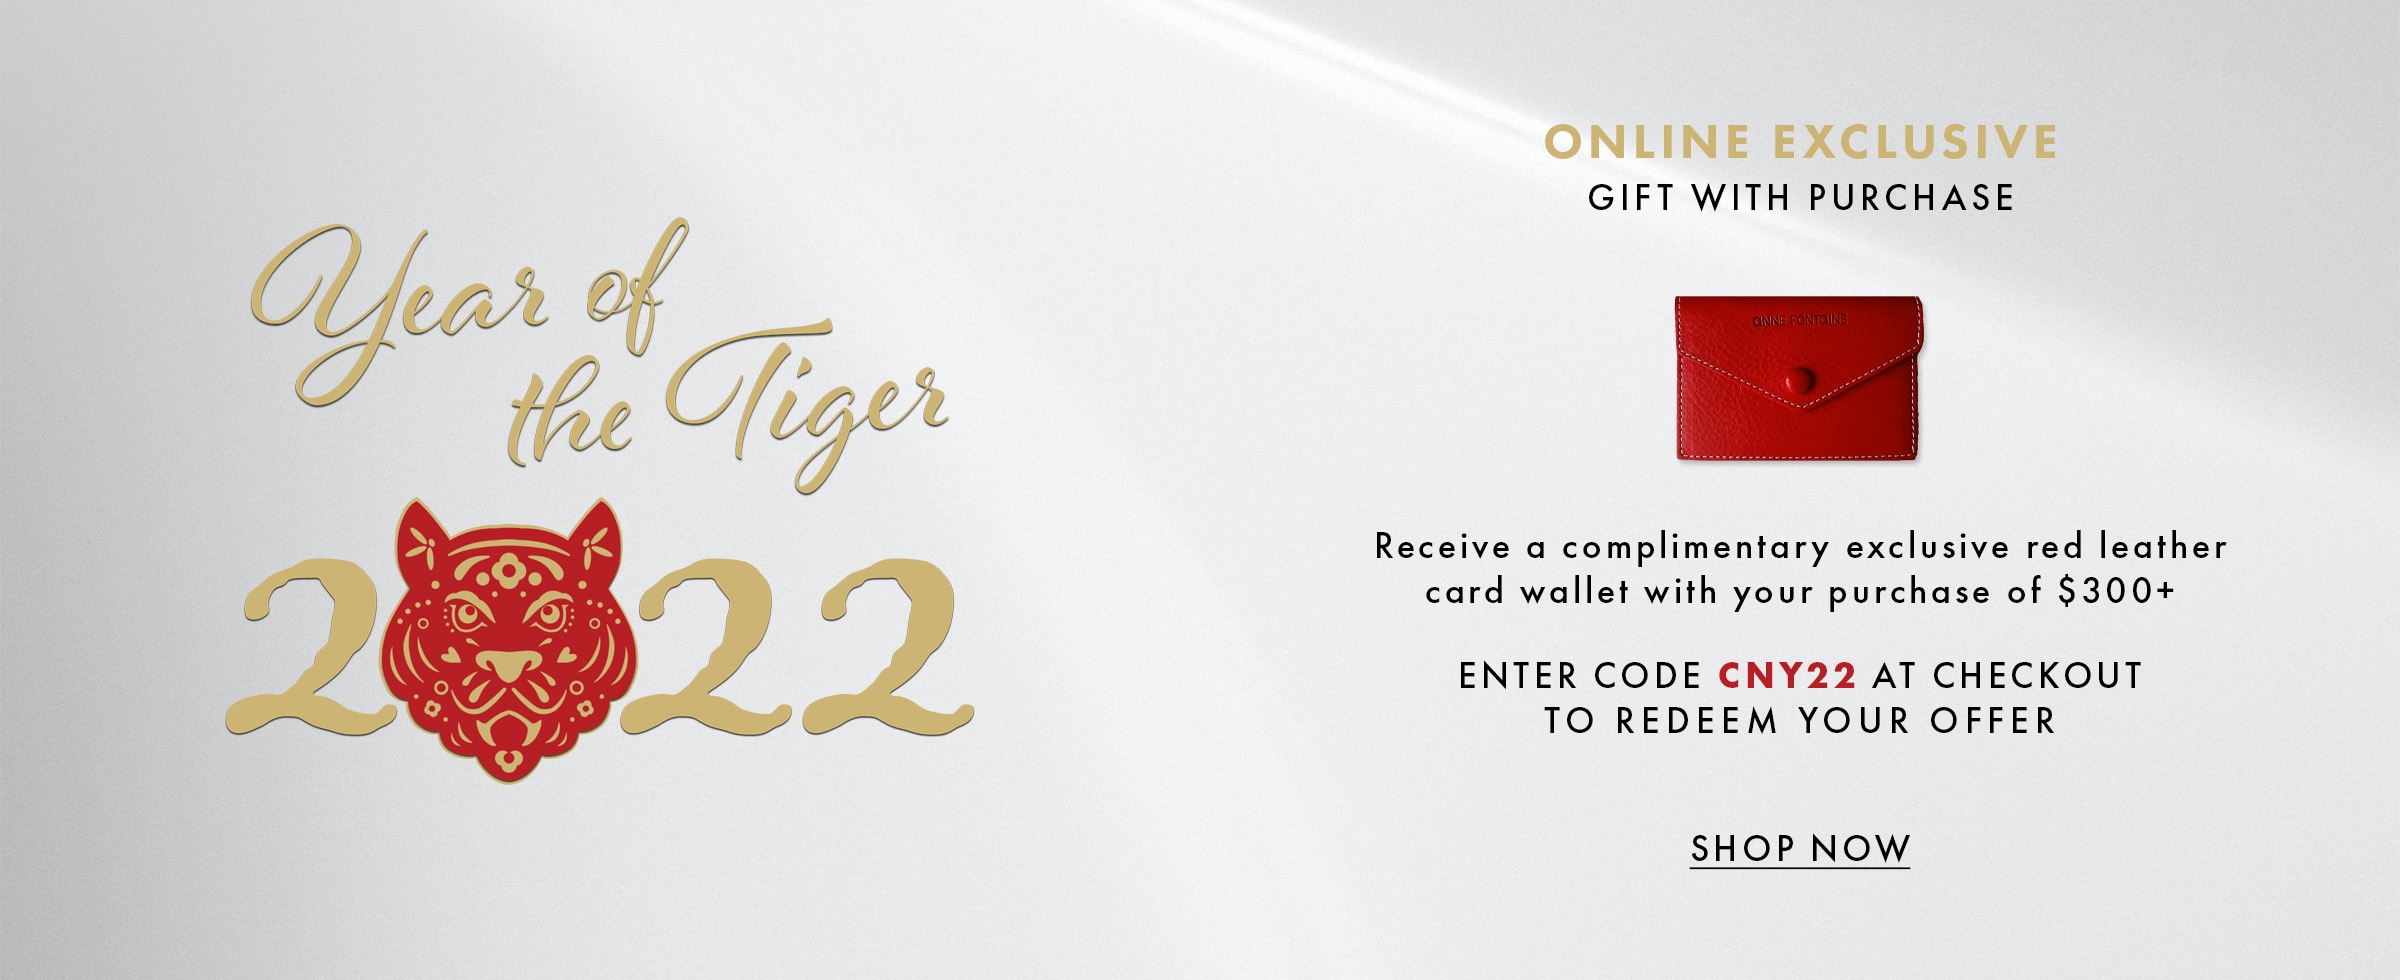 Celebrate The Year Of The Tiger With An Exclusive Gift With Purchase